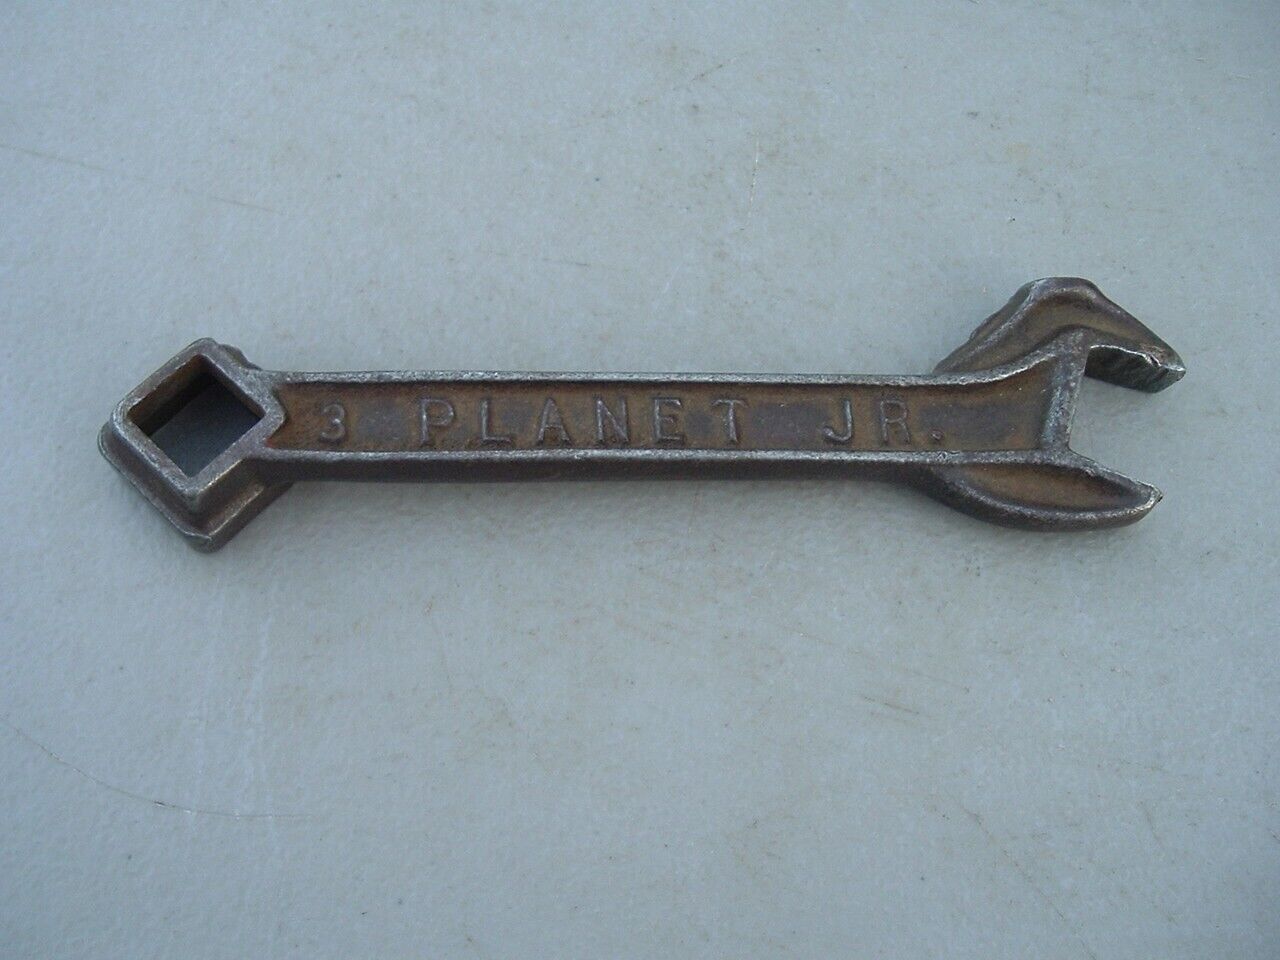 Vintage Planet Jr No 3 Old Farm Implement Combination Wrench